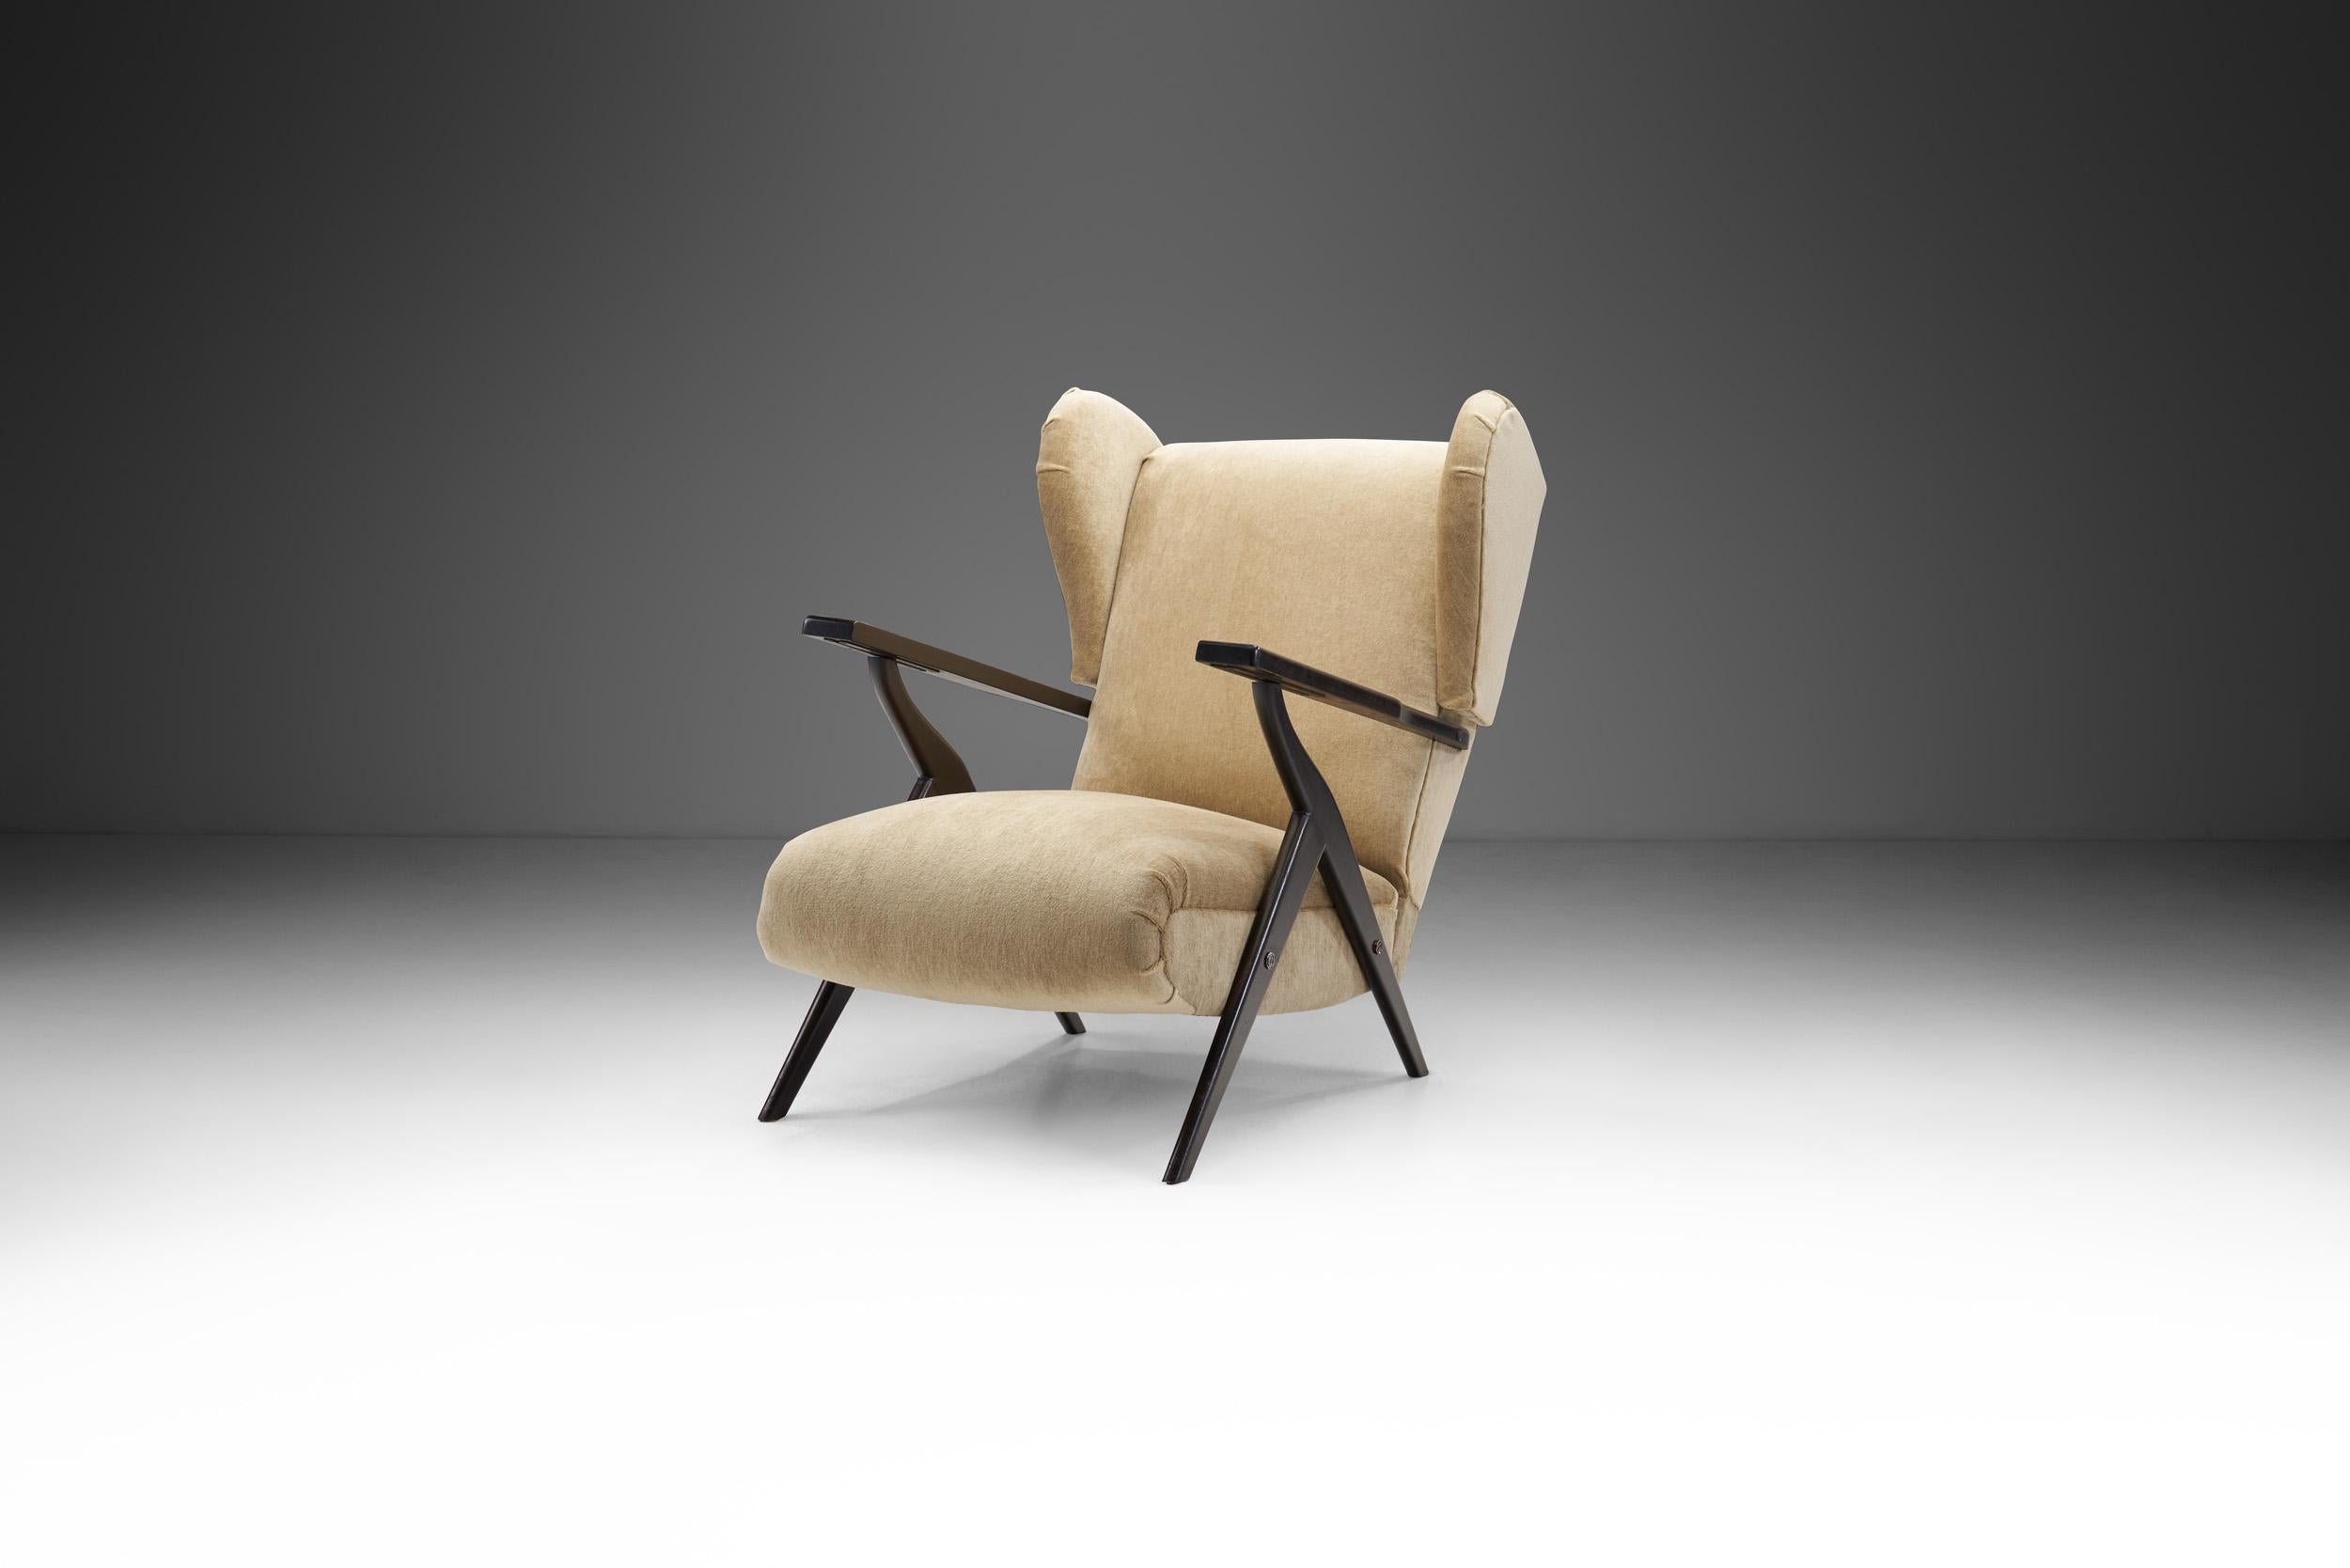 The 1950s saw brilliant Italian designers working to create furniture of the highest quality that explored truly modern shapes and innovative techniques. Designers experimented with new materials and construction methods but, crucially, they kept